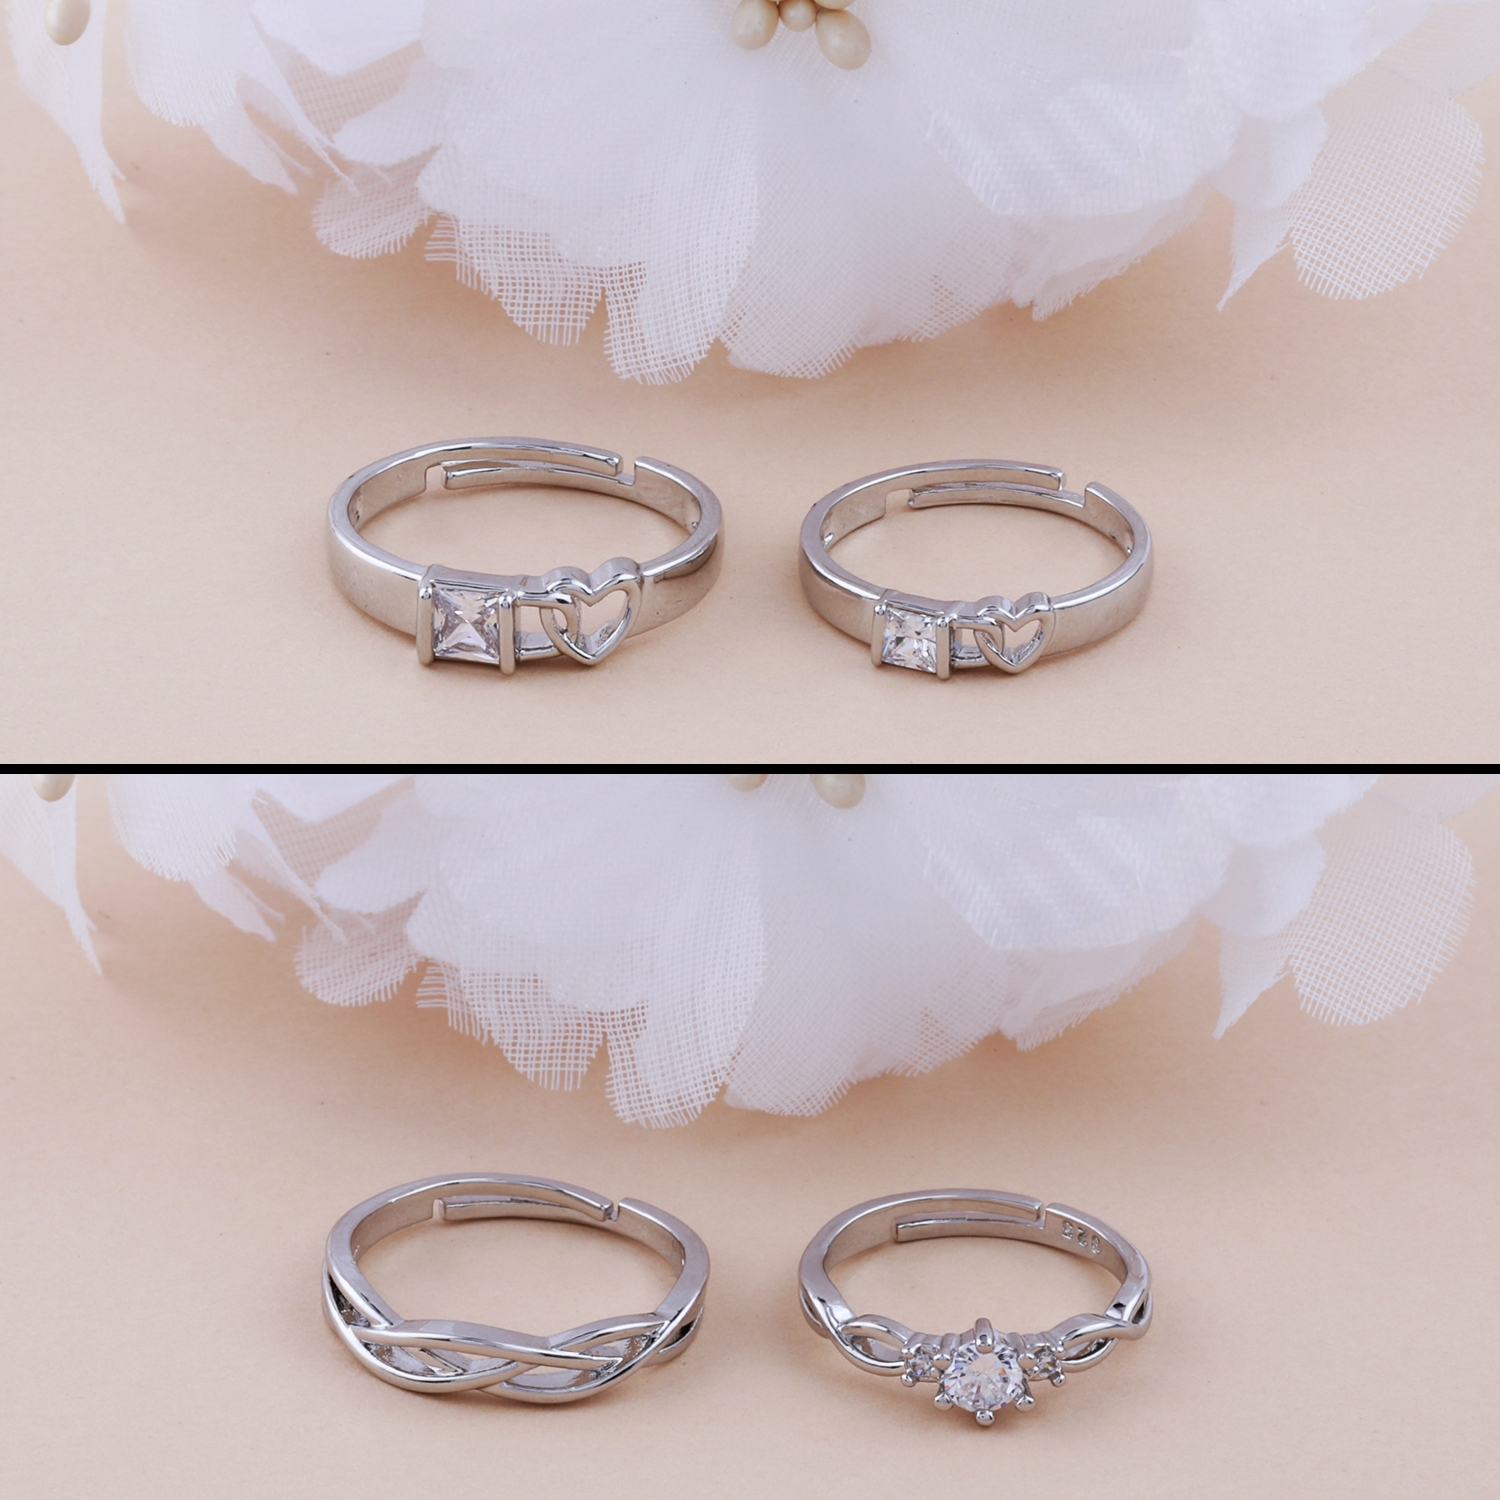 BlueShine Adjustable Couple Ring for lovers in Silver valentine gift  proposal Finger Rings Alloy Cubic Zirconia Silver Plated Ring Set Price in  India - Buy BlueShine Adjustable Couple Ring for lovers in